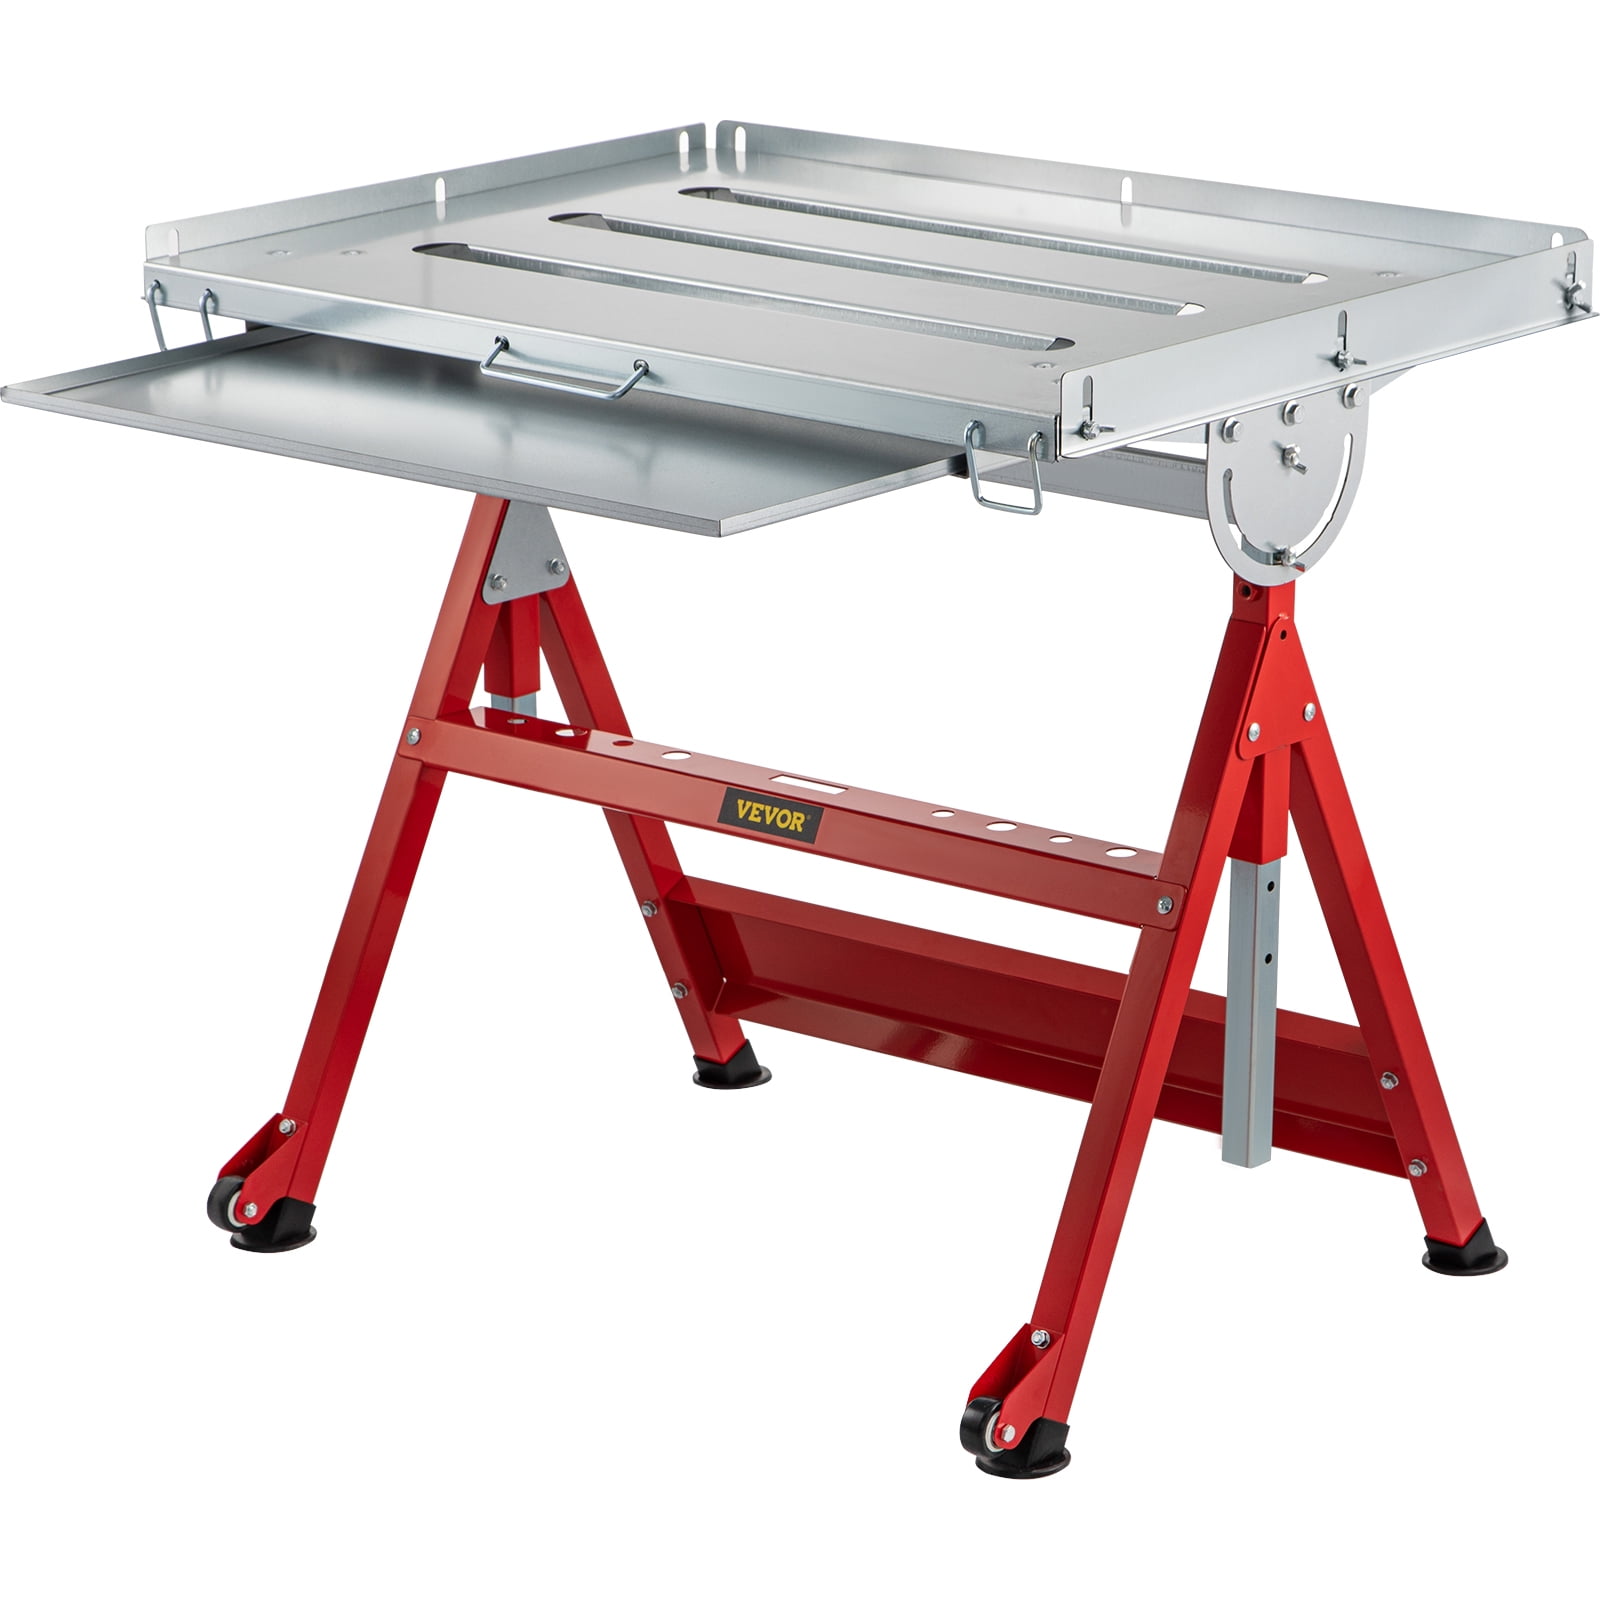 Speedjaw Portable Clamping Project Station with Adjustable Platform 93335 